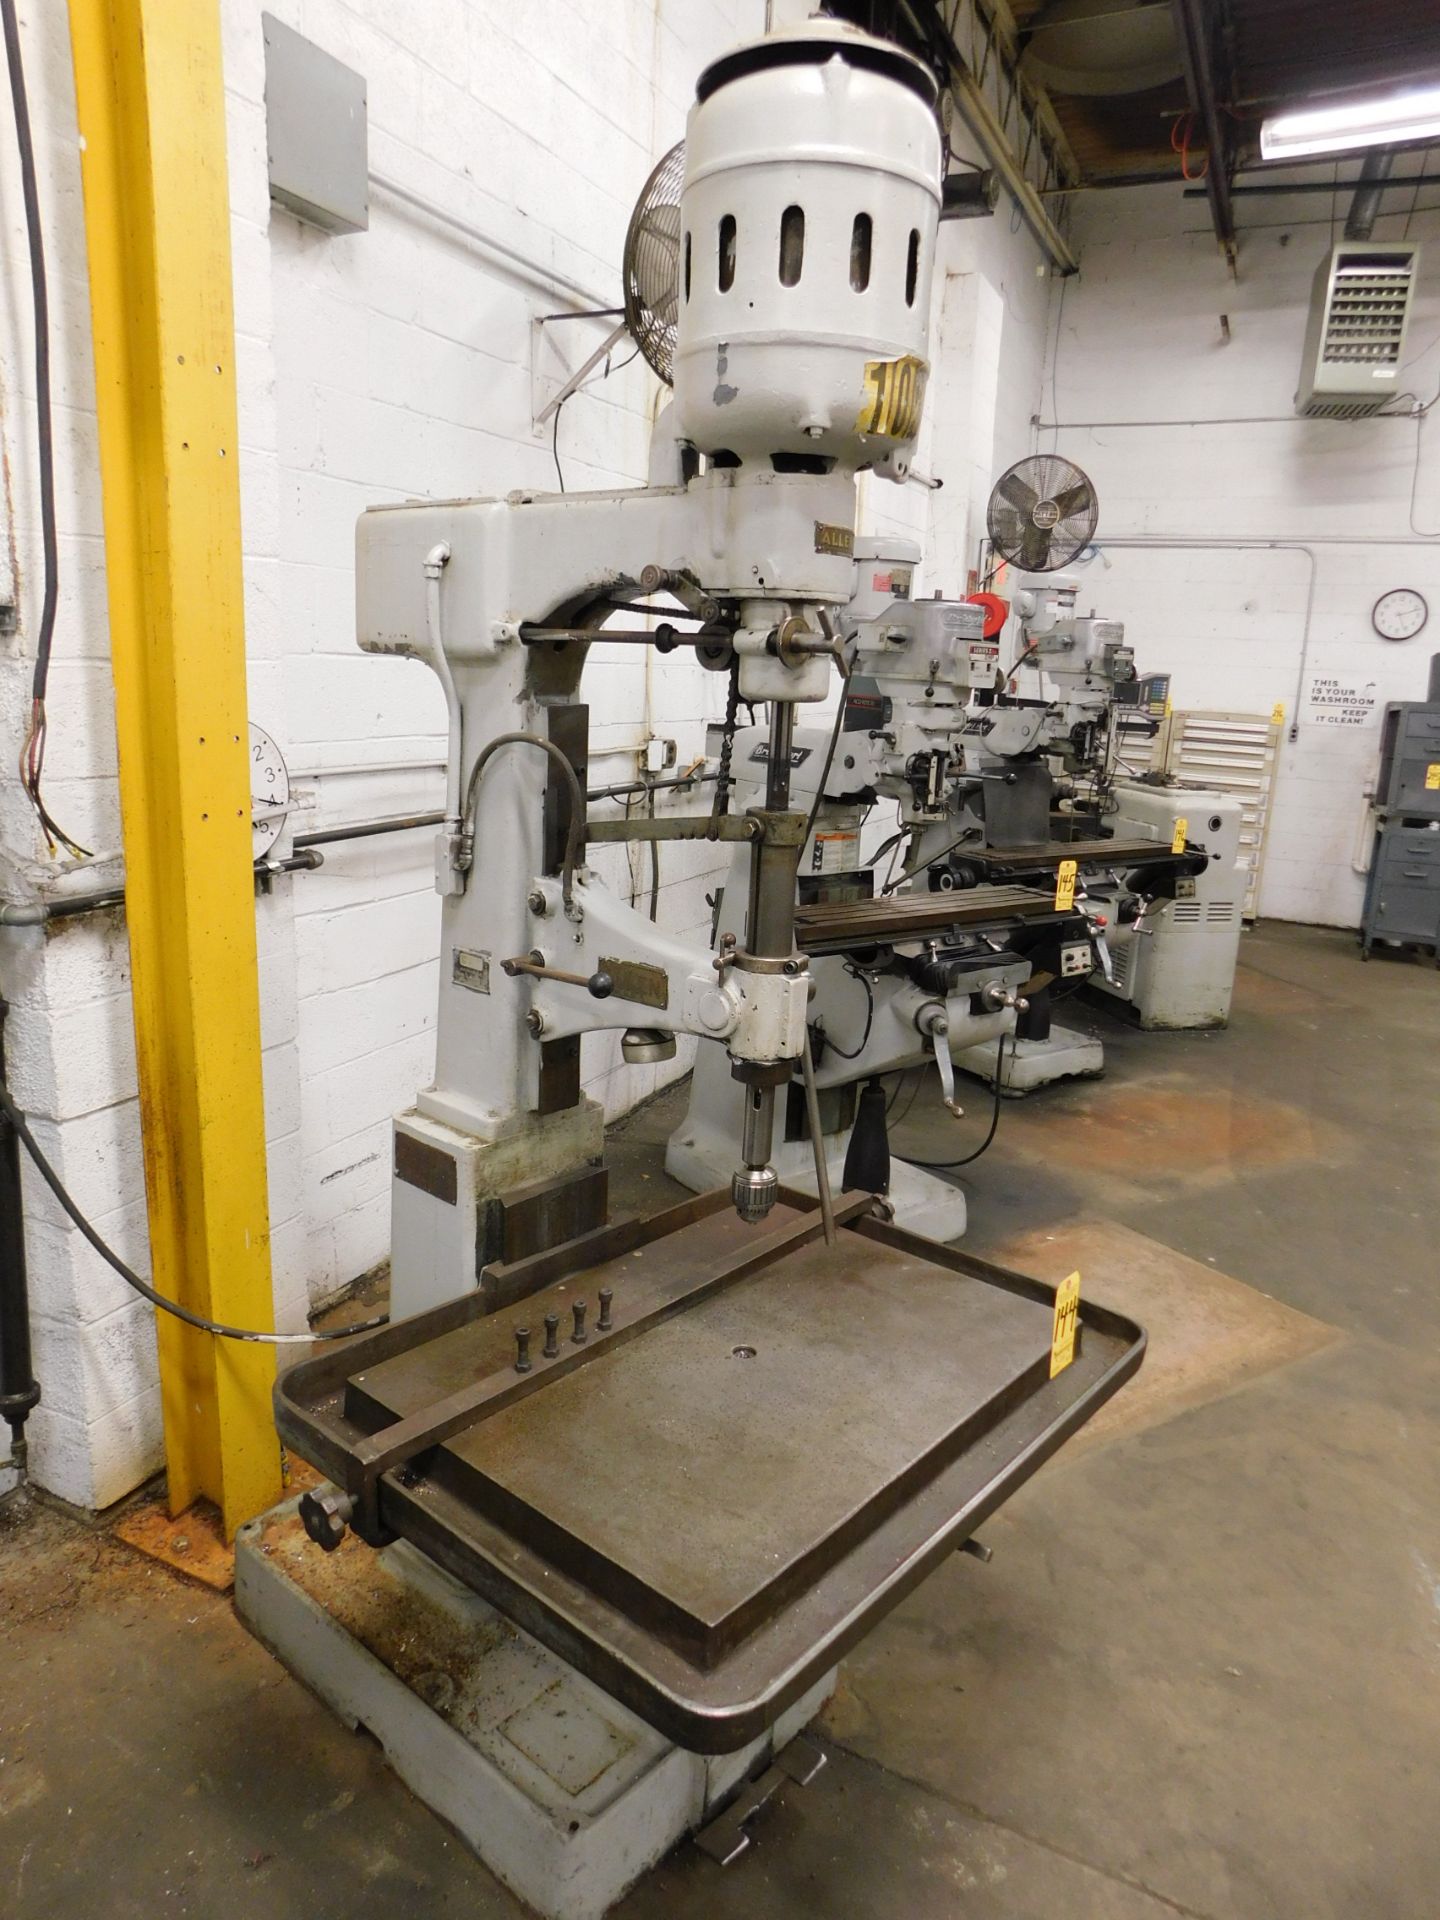 Allen 30 Inch Floor Model Drill Press, Single Spindle, 24 In. X 34 In. Table, 3 MT, Loading Fee $100 - Image 2 of 16